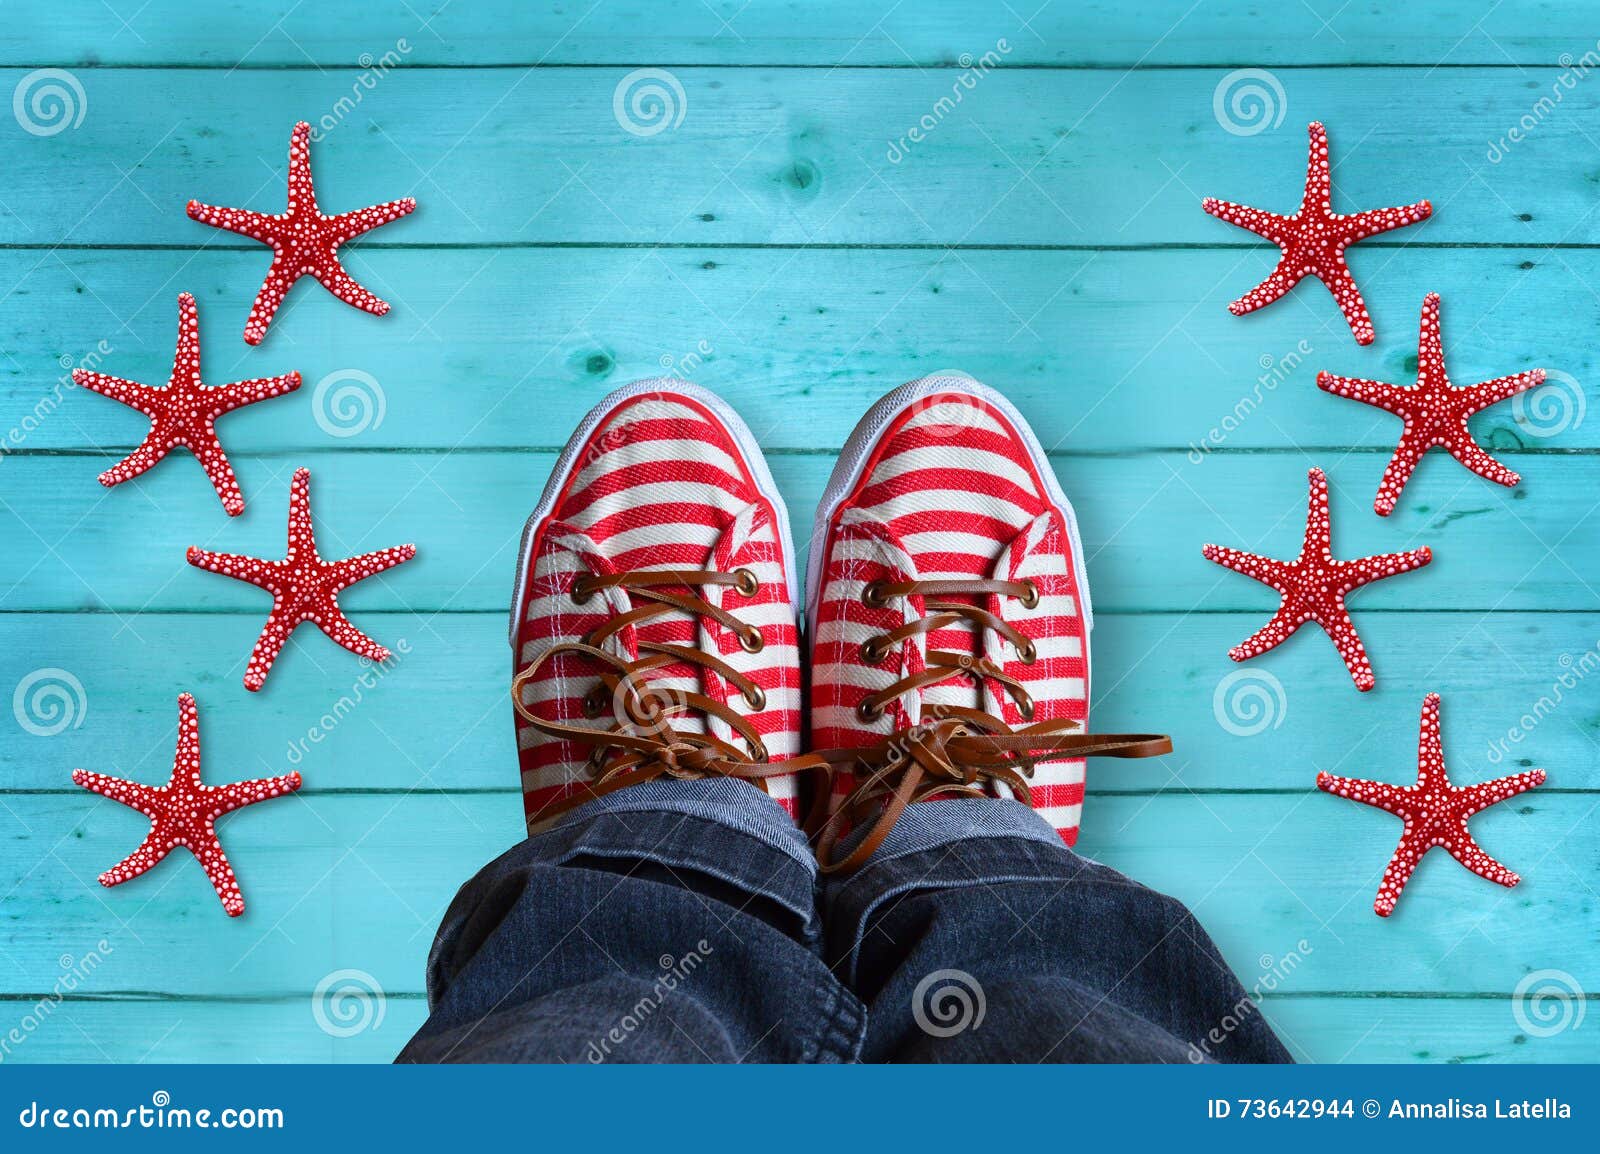 red shoes with white stripes